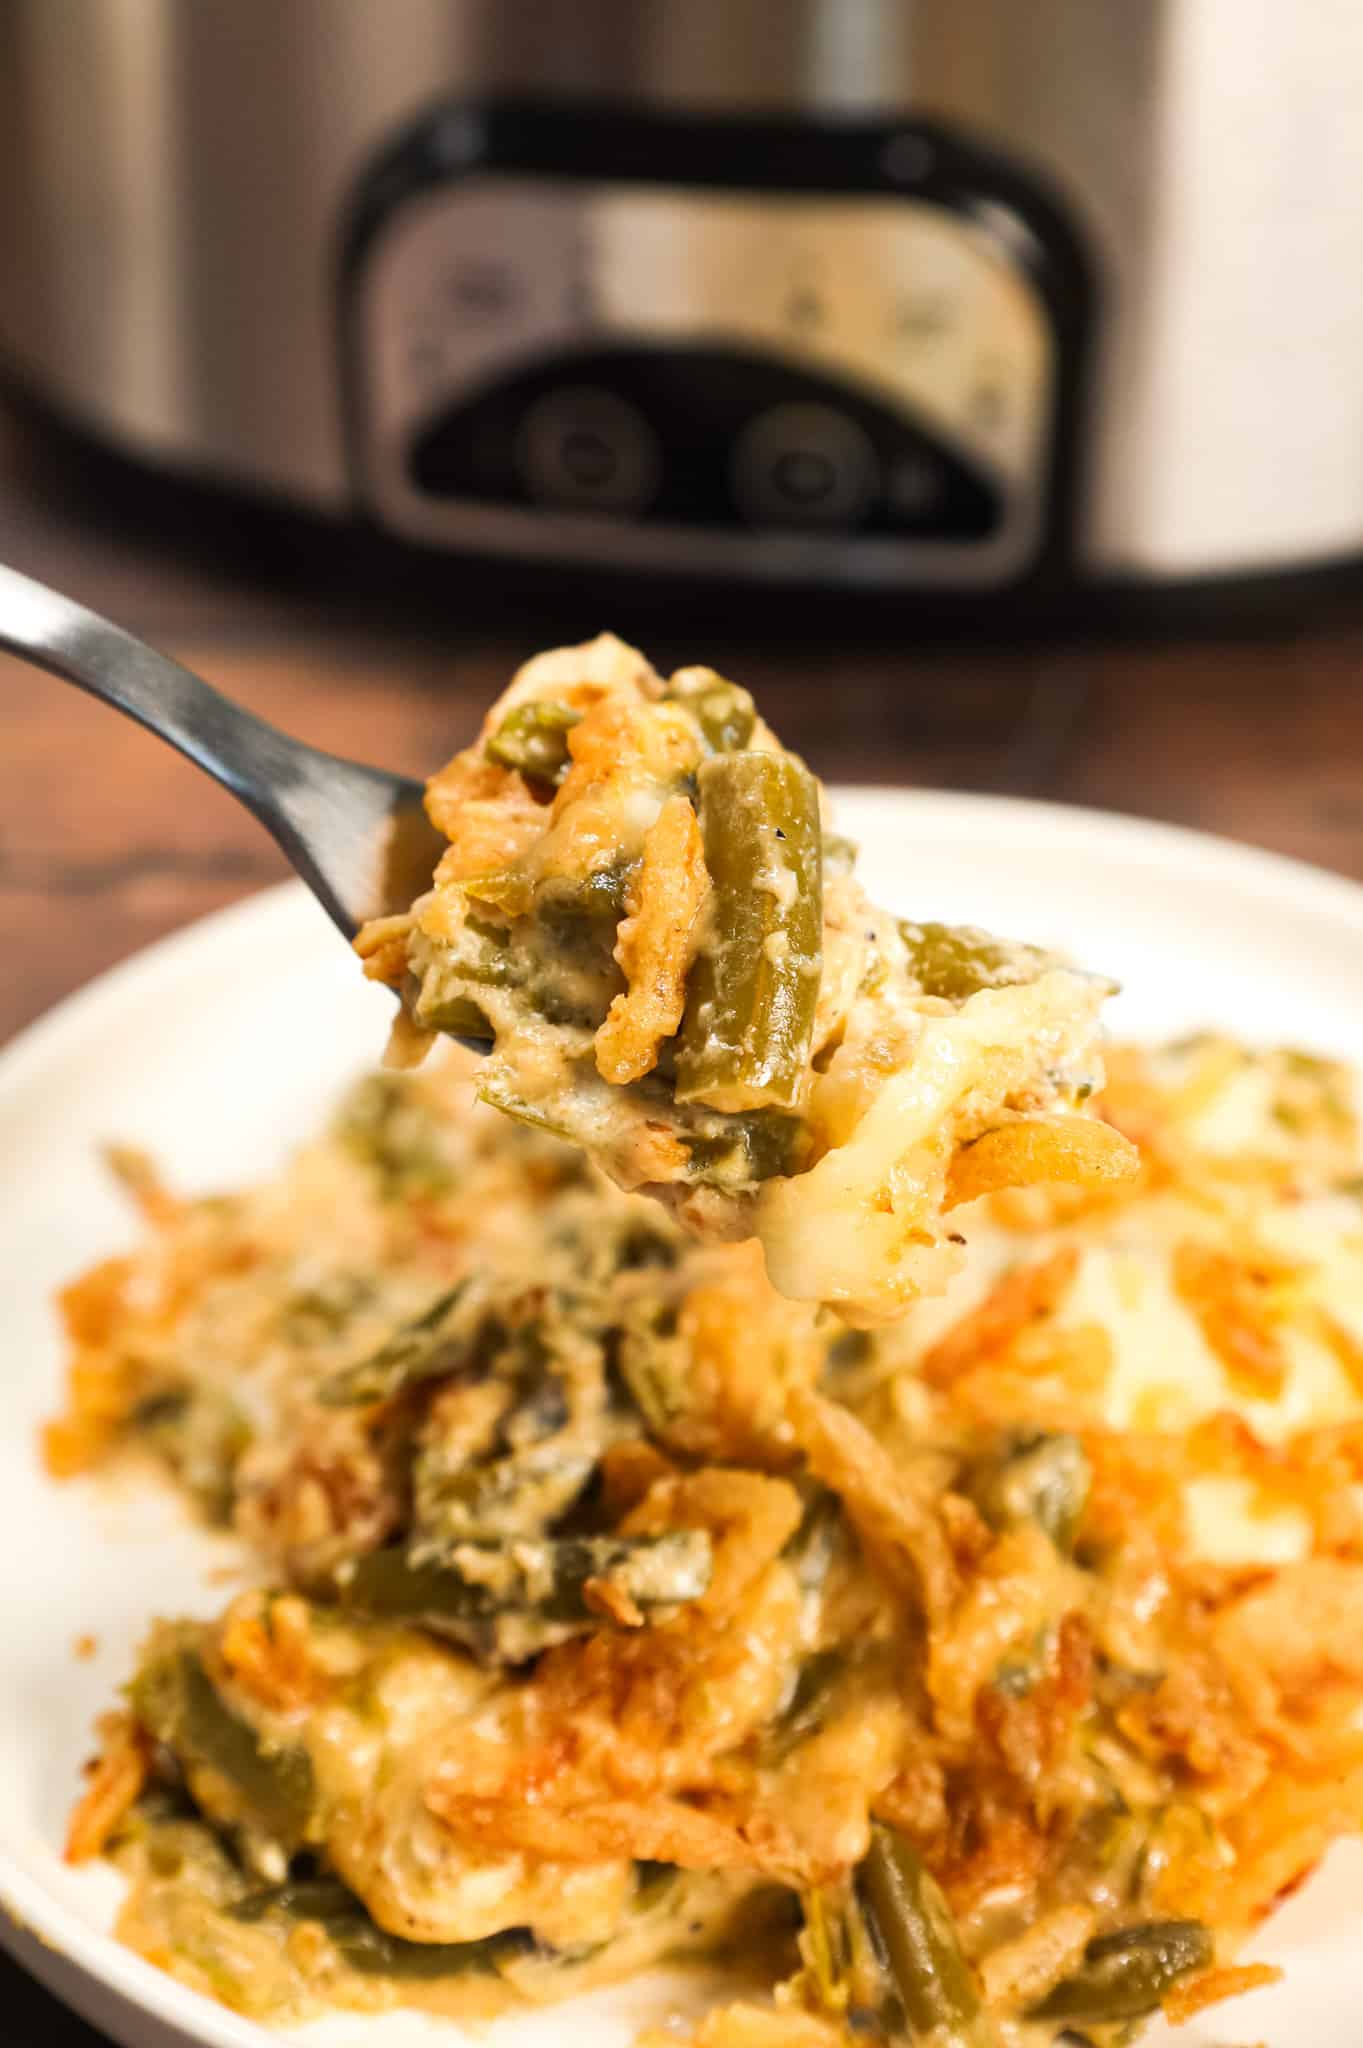 Crock Pot Green Bean Casserole is an easy slow cooker side dish recipe loaded with cut green beans, cream of mushroom soup, cheddar soup, cream cheese, provolone cheese and French's crispy fried onions.